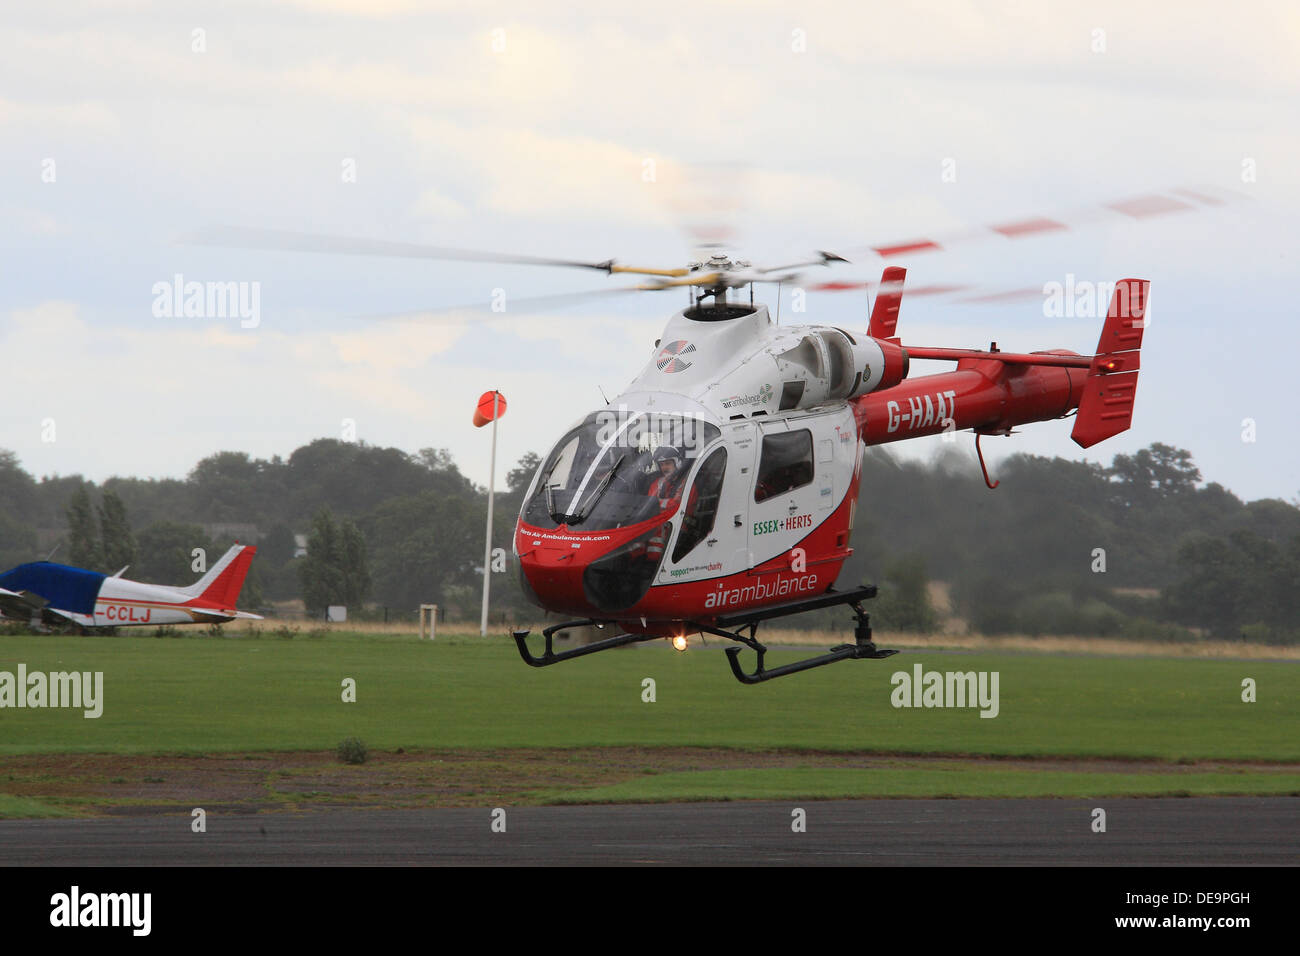 Essex and Herts Air Ambulance Police Aviation Services MD Helicopters MD-900 Explorer aircraft Stock Photo